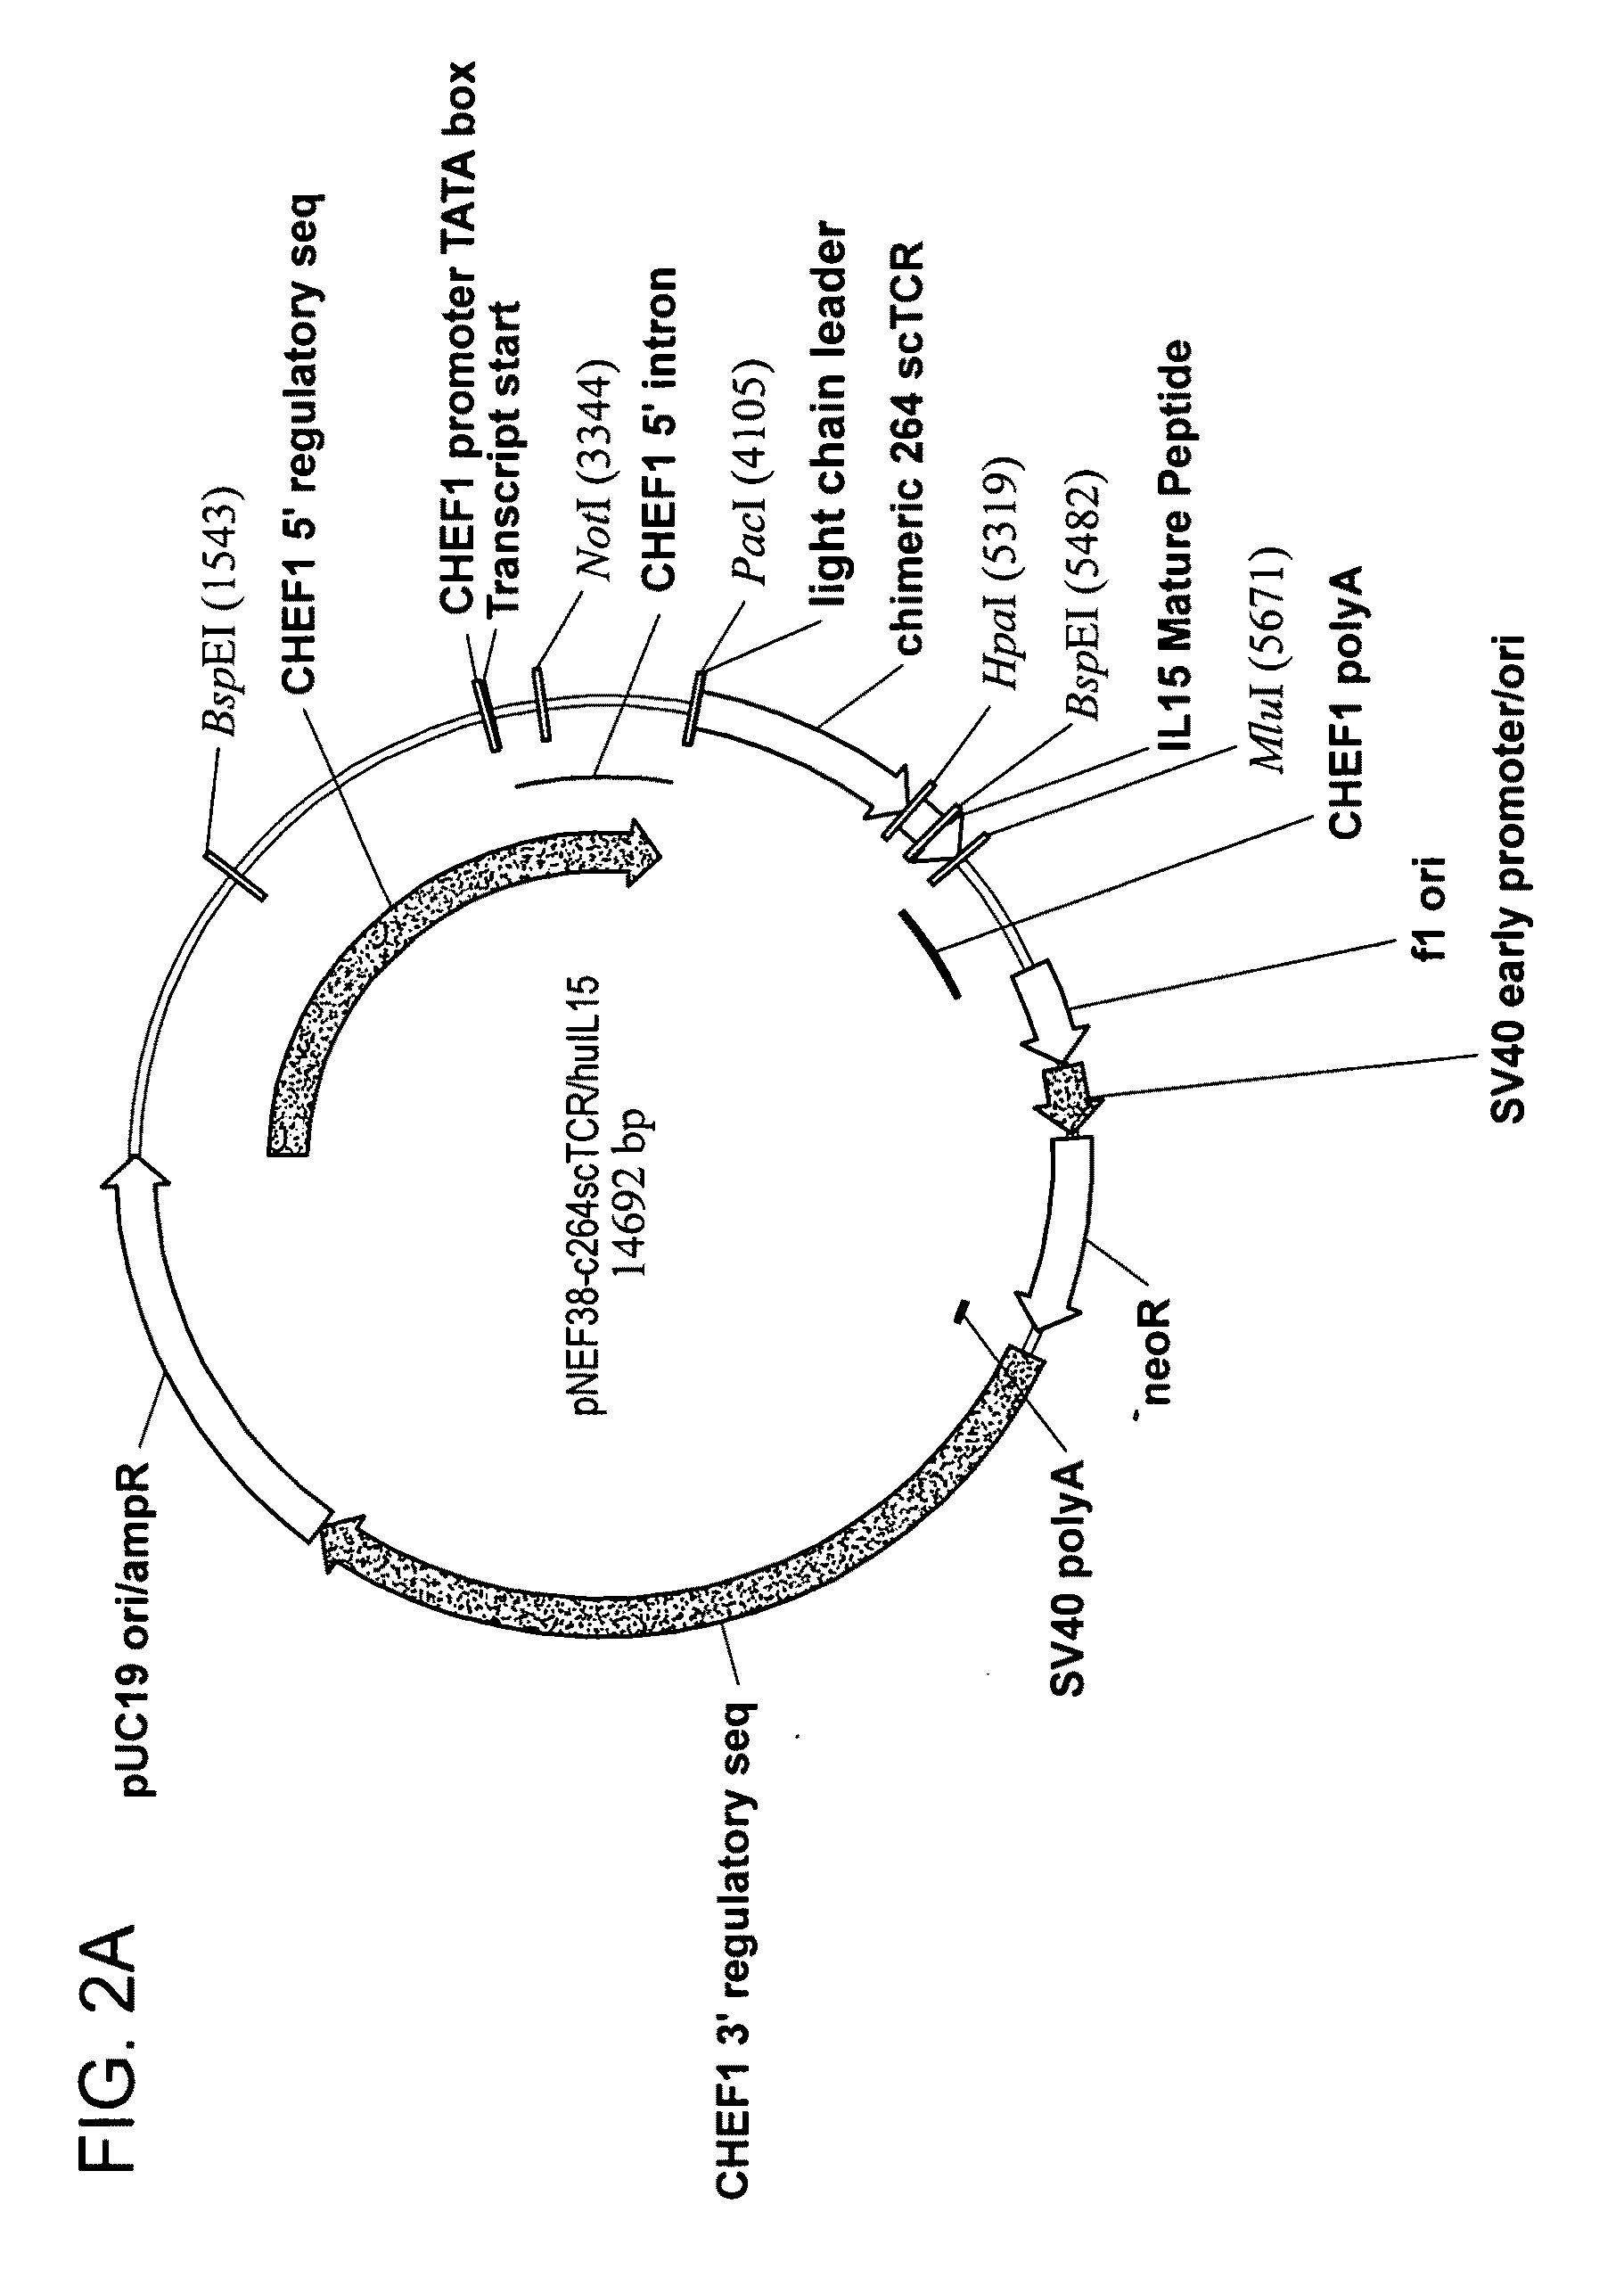 Fusion molecules and IL-15 variants